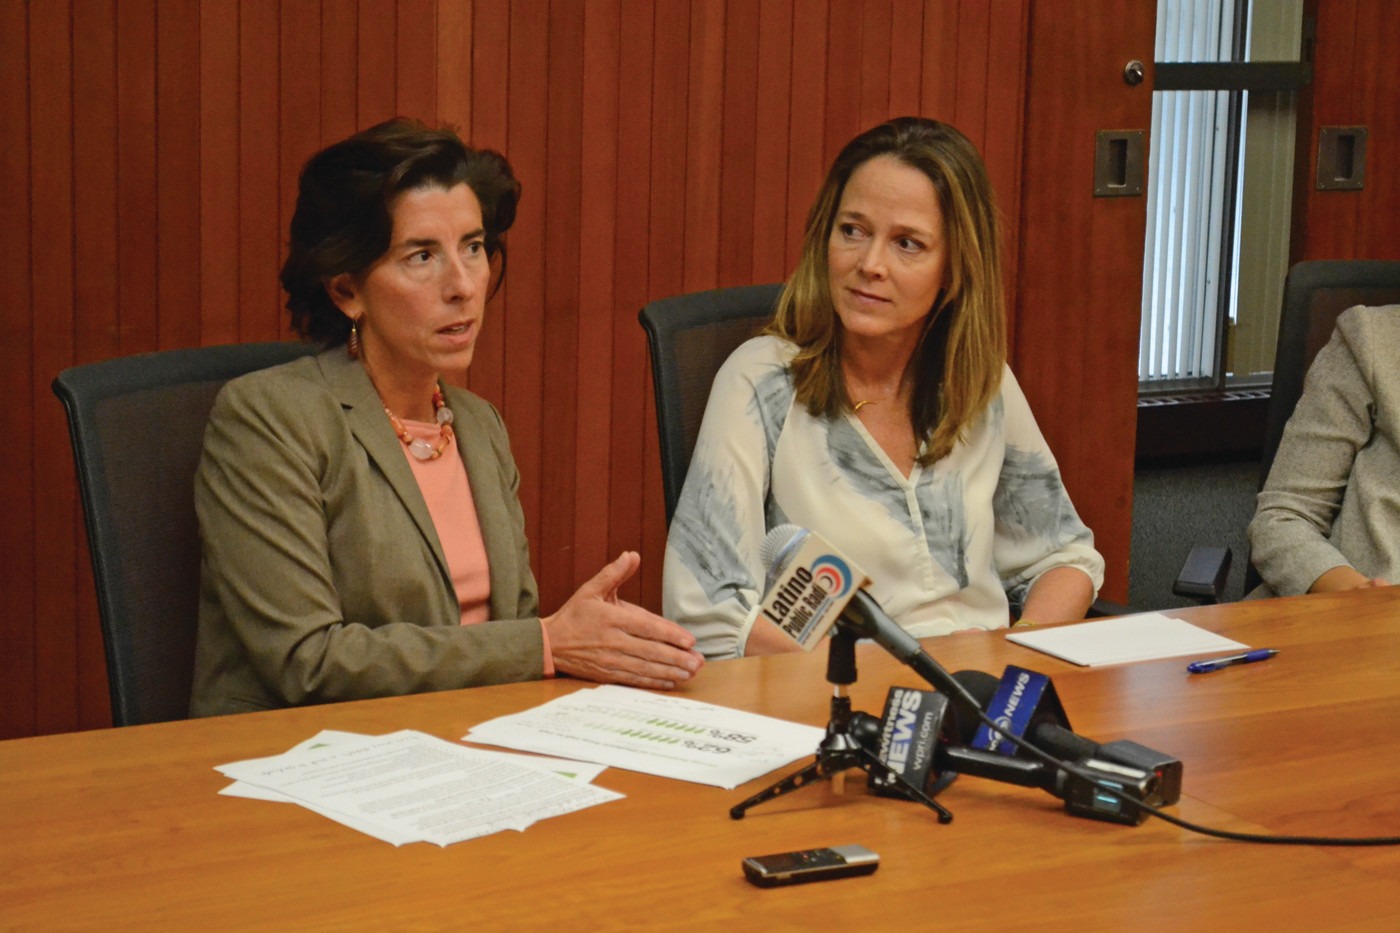 REPORTING RESULTS: Governor Gina Raimondo and CCRI President Meghan Hughes answer questions from the media about the first year of the Rhode Island Promise scholarship.